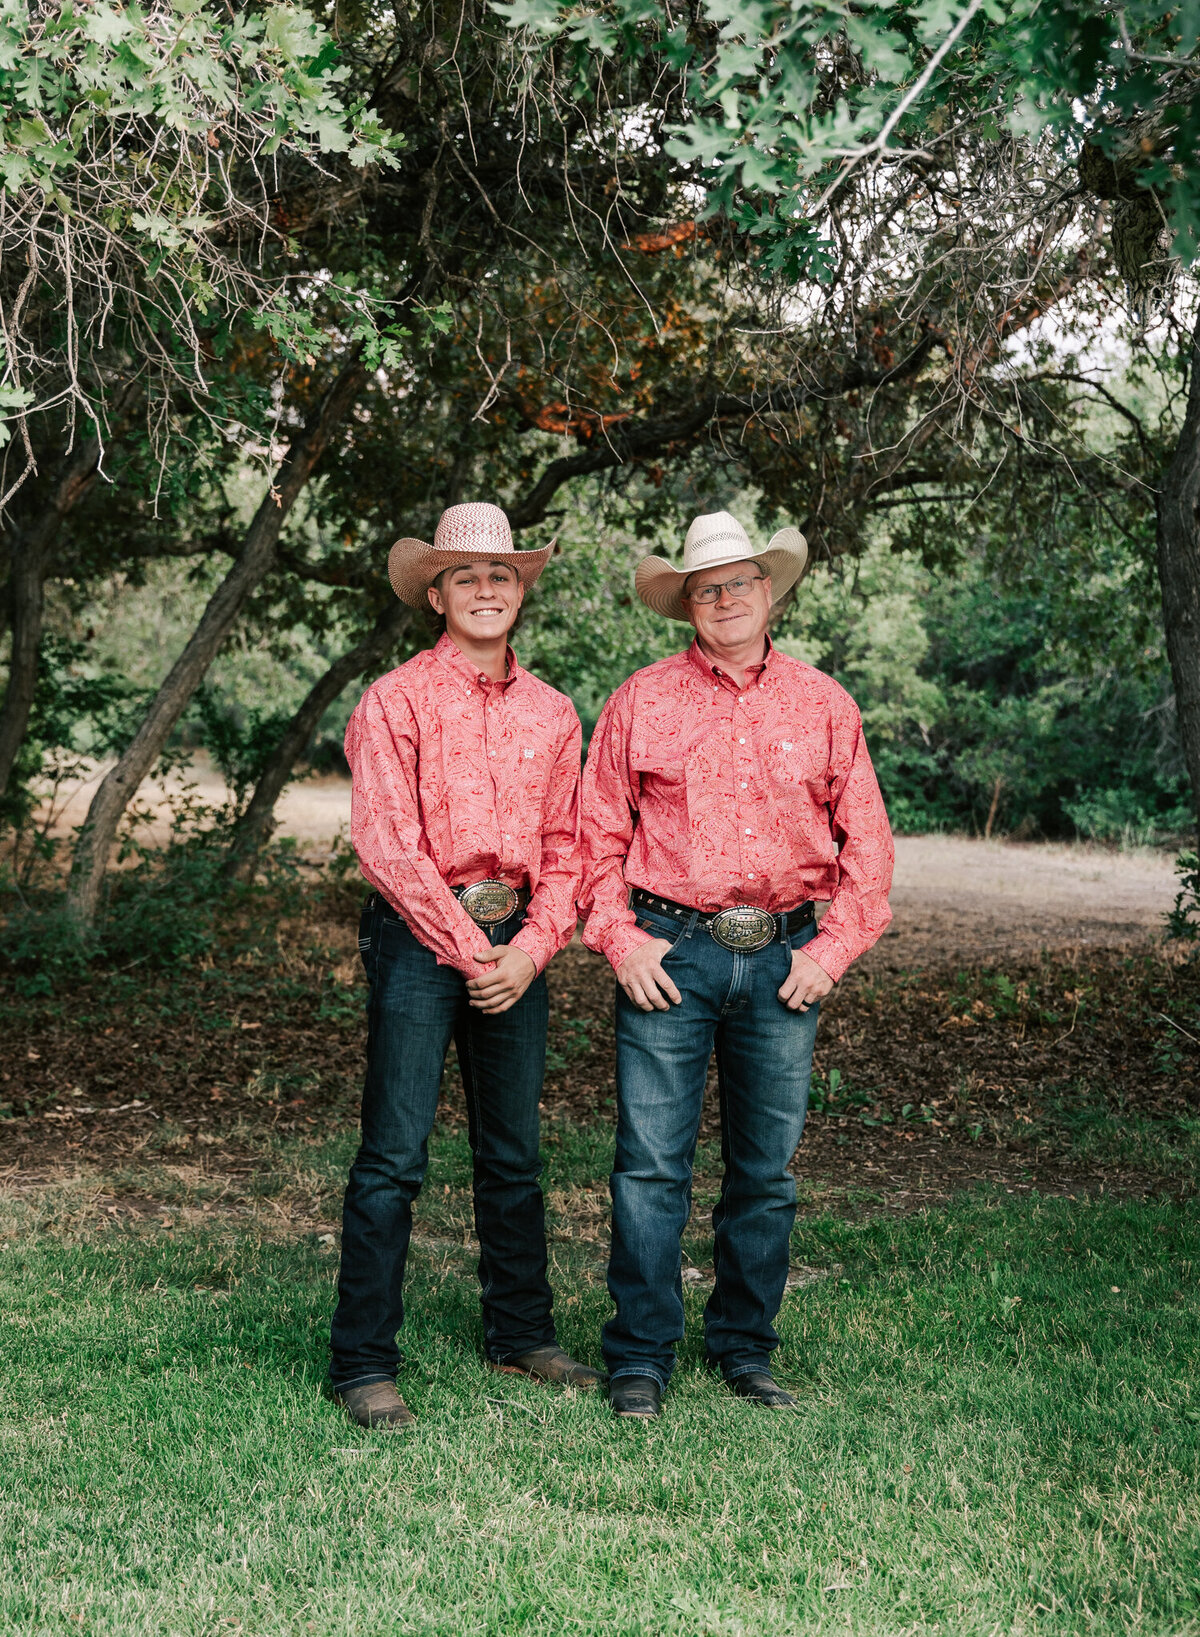 Two cowboys pose together.